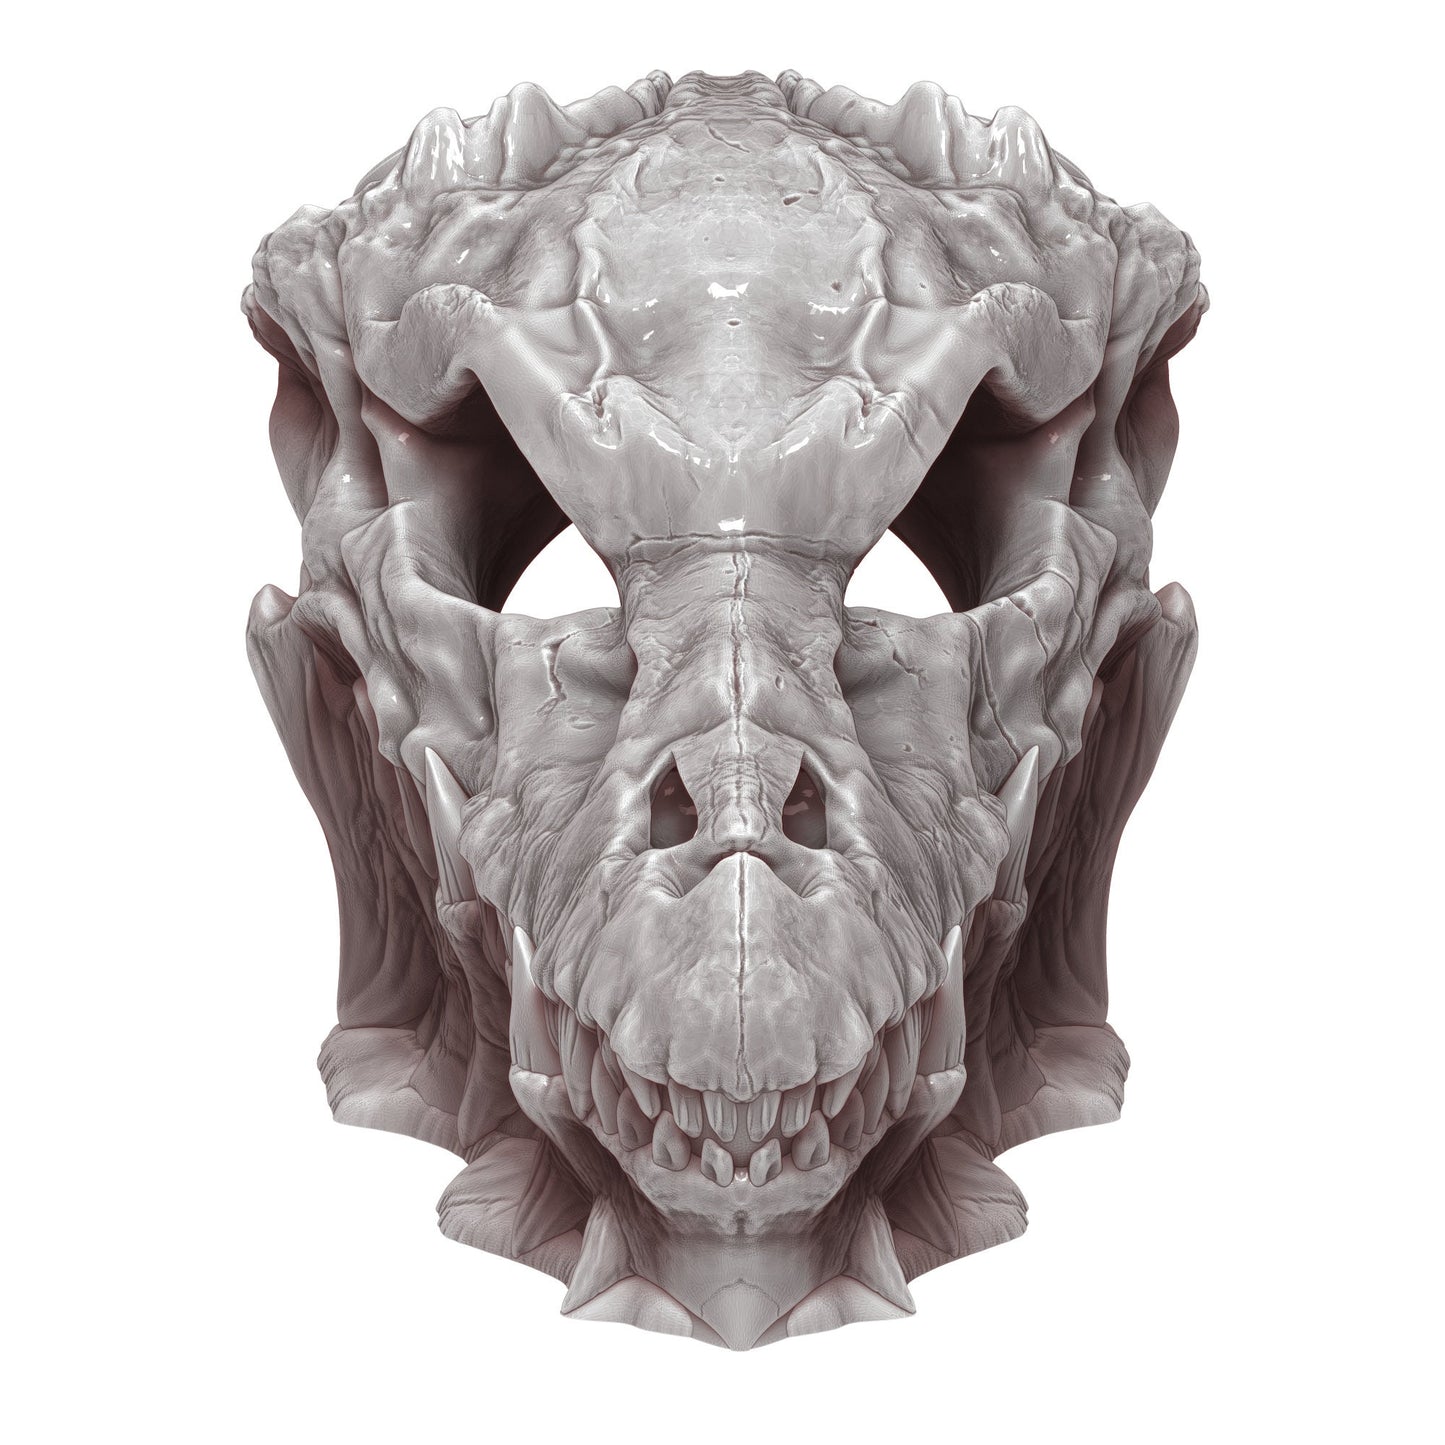 Dragon Skull 3D Printed Dice Tower - Mythic Roll Collection by Unchained Games | Dice Tray | D20 Dice Vault - Unearth Power Within the Skull